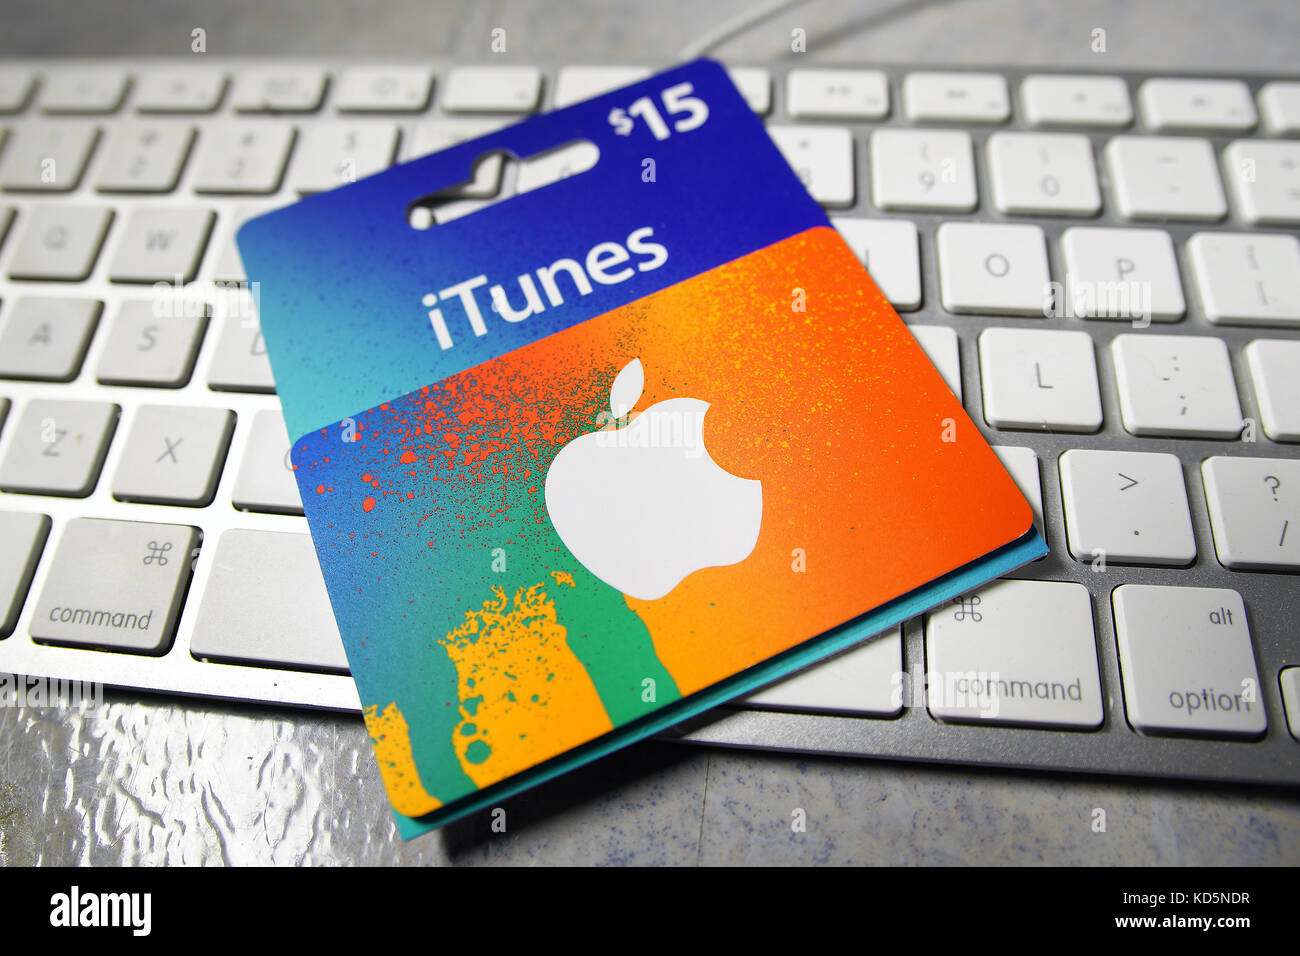 How to Use iTunes Store Qatar and iTunes Card - Think24 Gaming & Gadgets Qatar